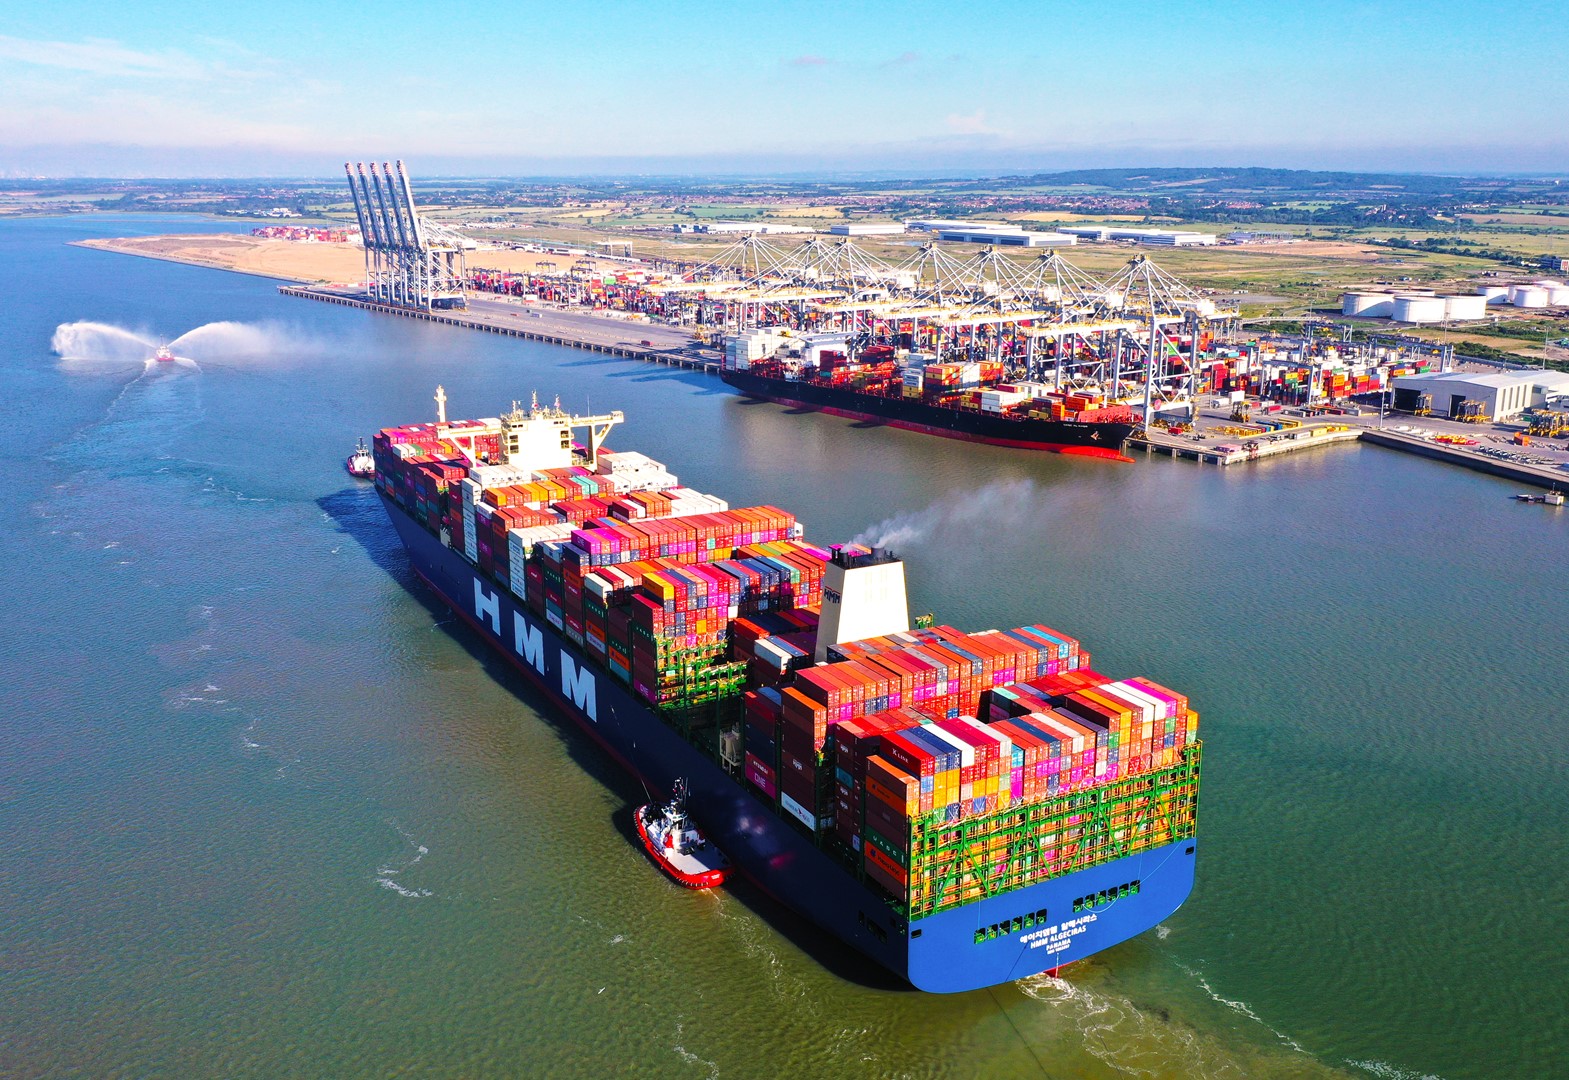 UK debut on the Thames for World’s biggest container ship